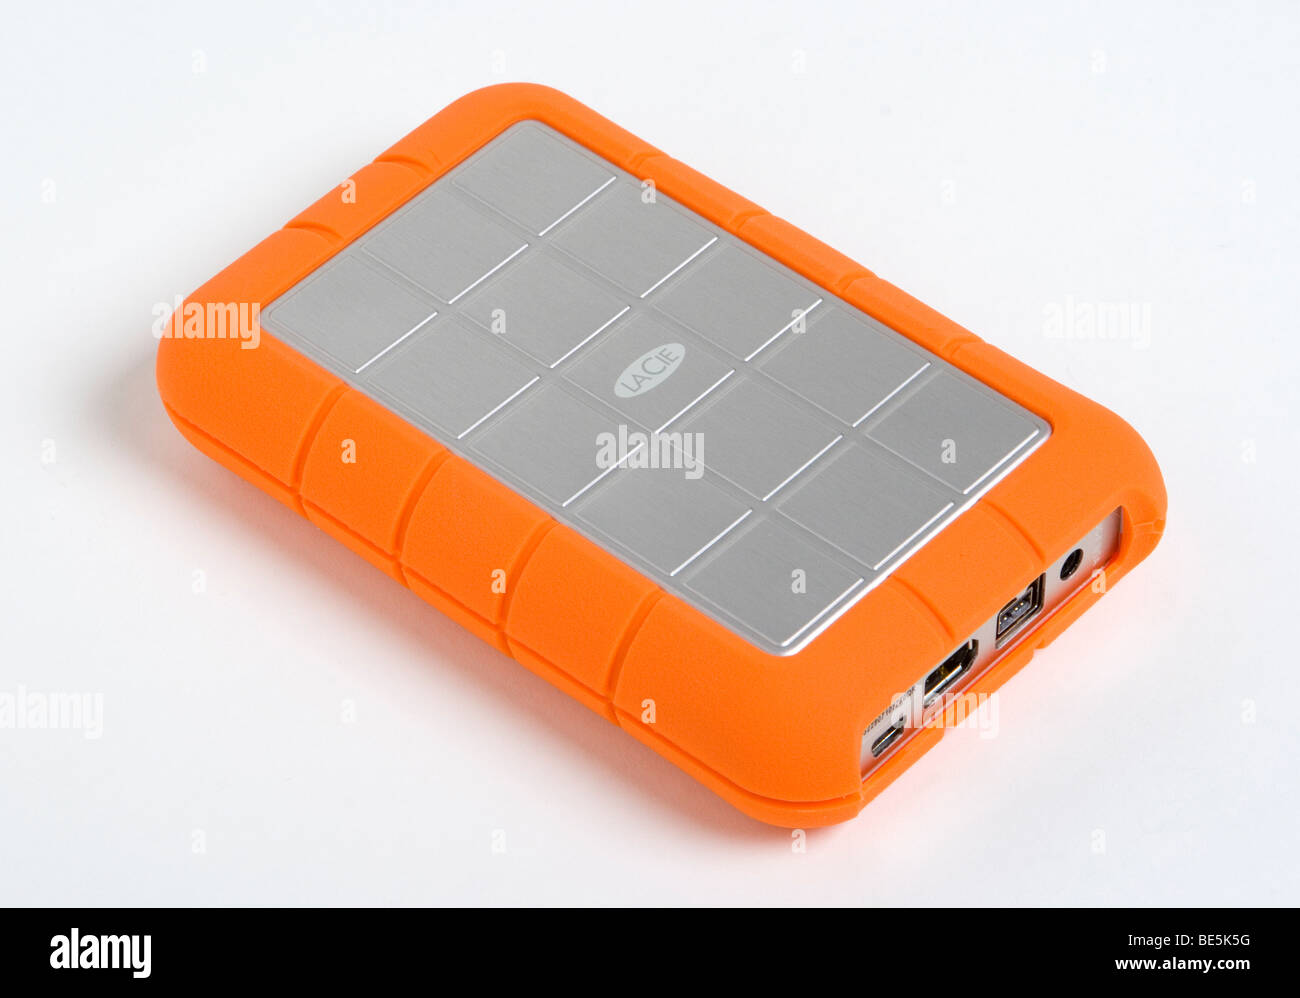 Lacie Rugged 1TB external hard drive showing FireWire 400, FireWire 800 and USB 2.0 ports Stock Photo